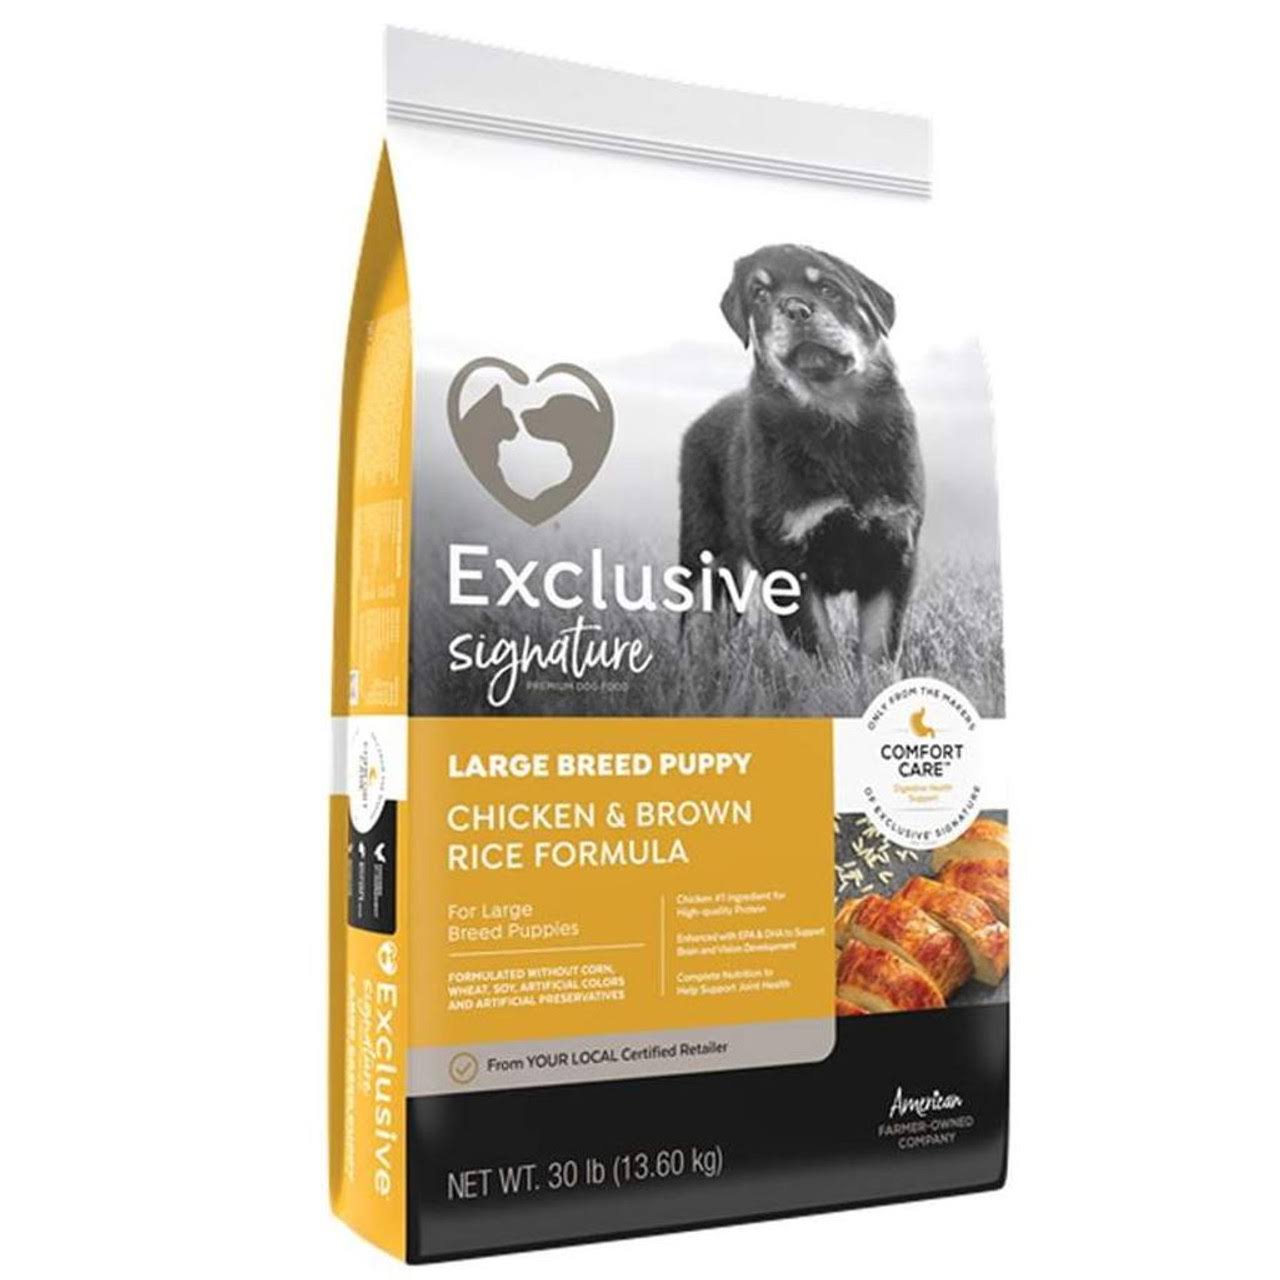 Exclusive Signature Large Breed Puppy Chicken & Brown Rice 30 lb